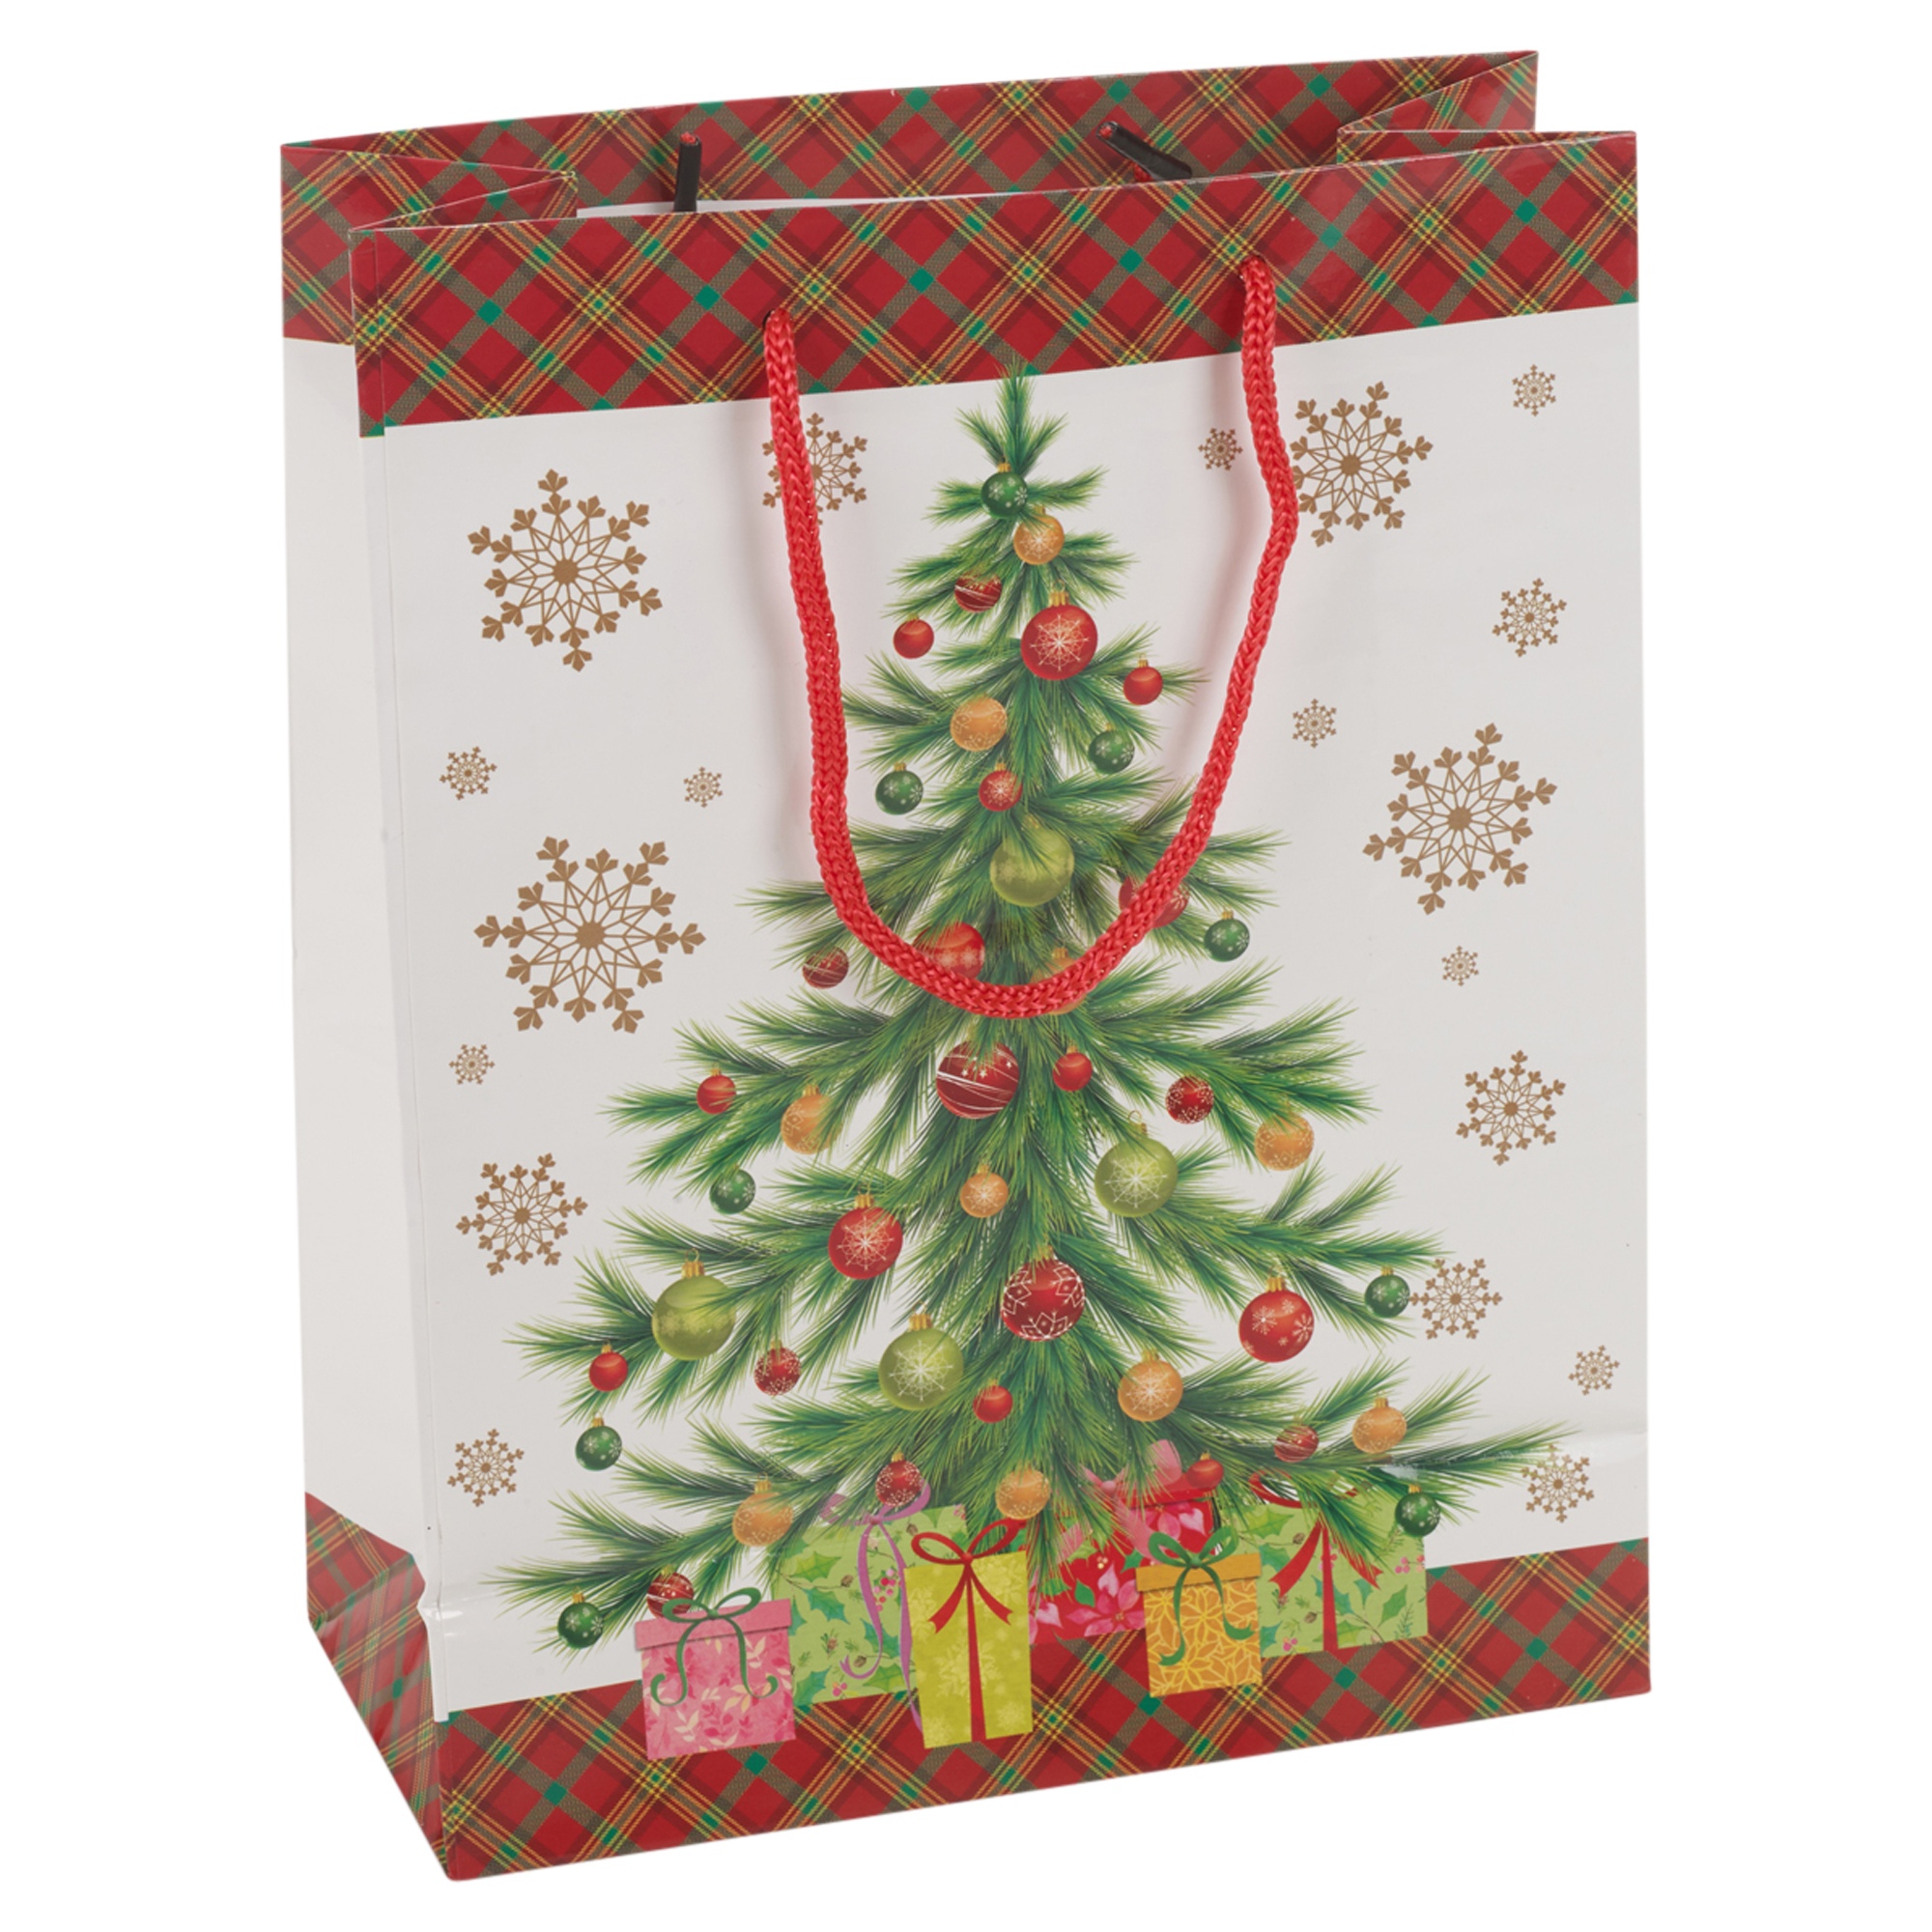 4 x Assorted Christmas Tree Style Gift Bags Set Xmas Party Gift Cord ...